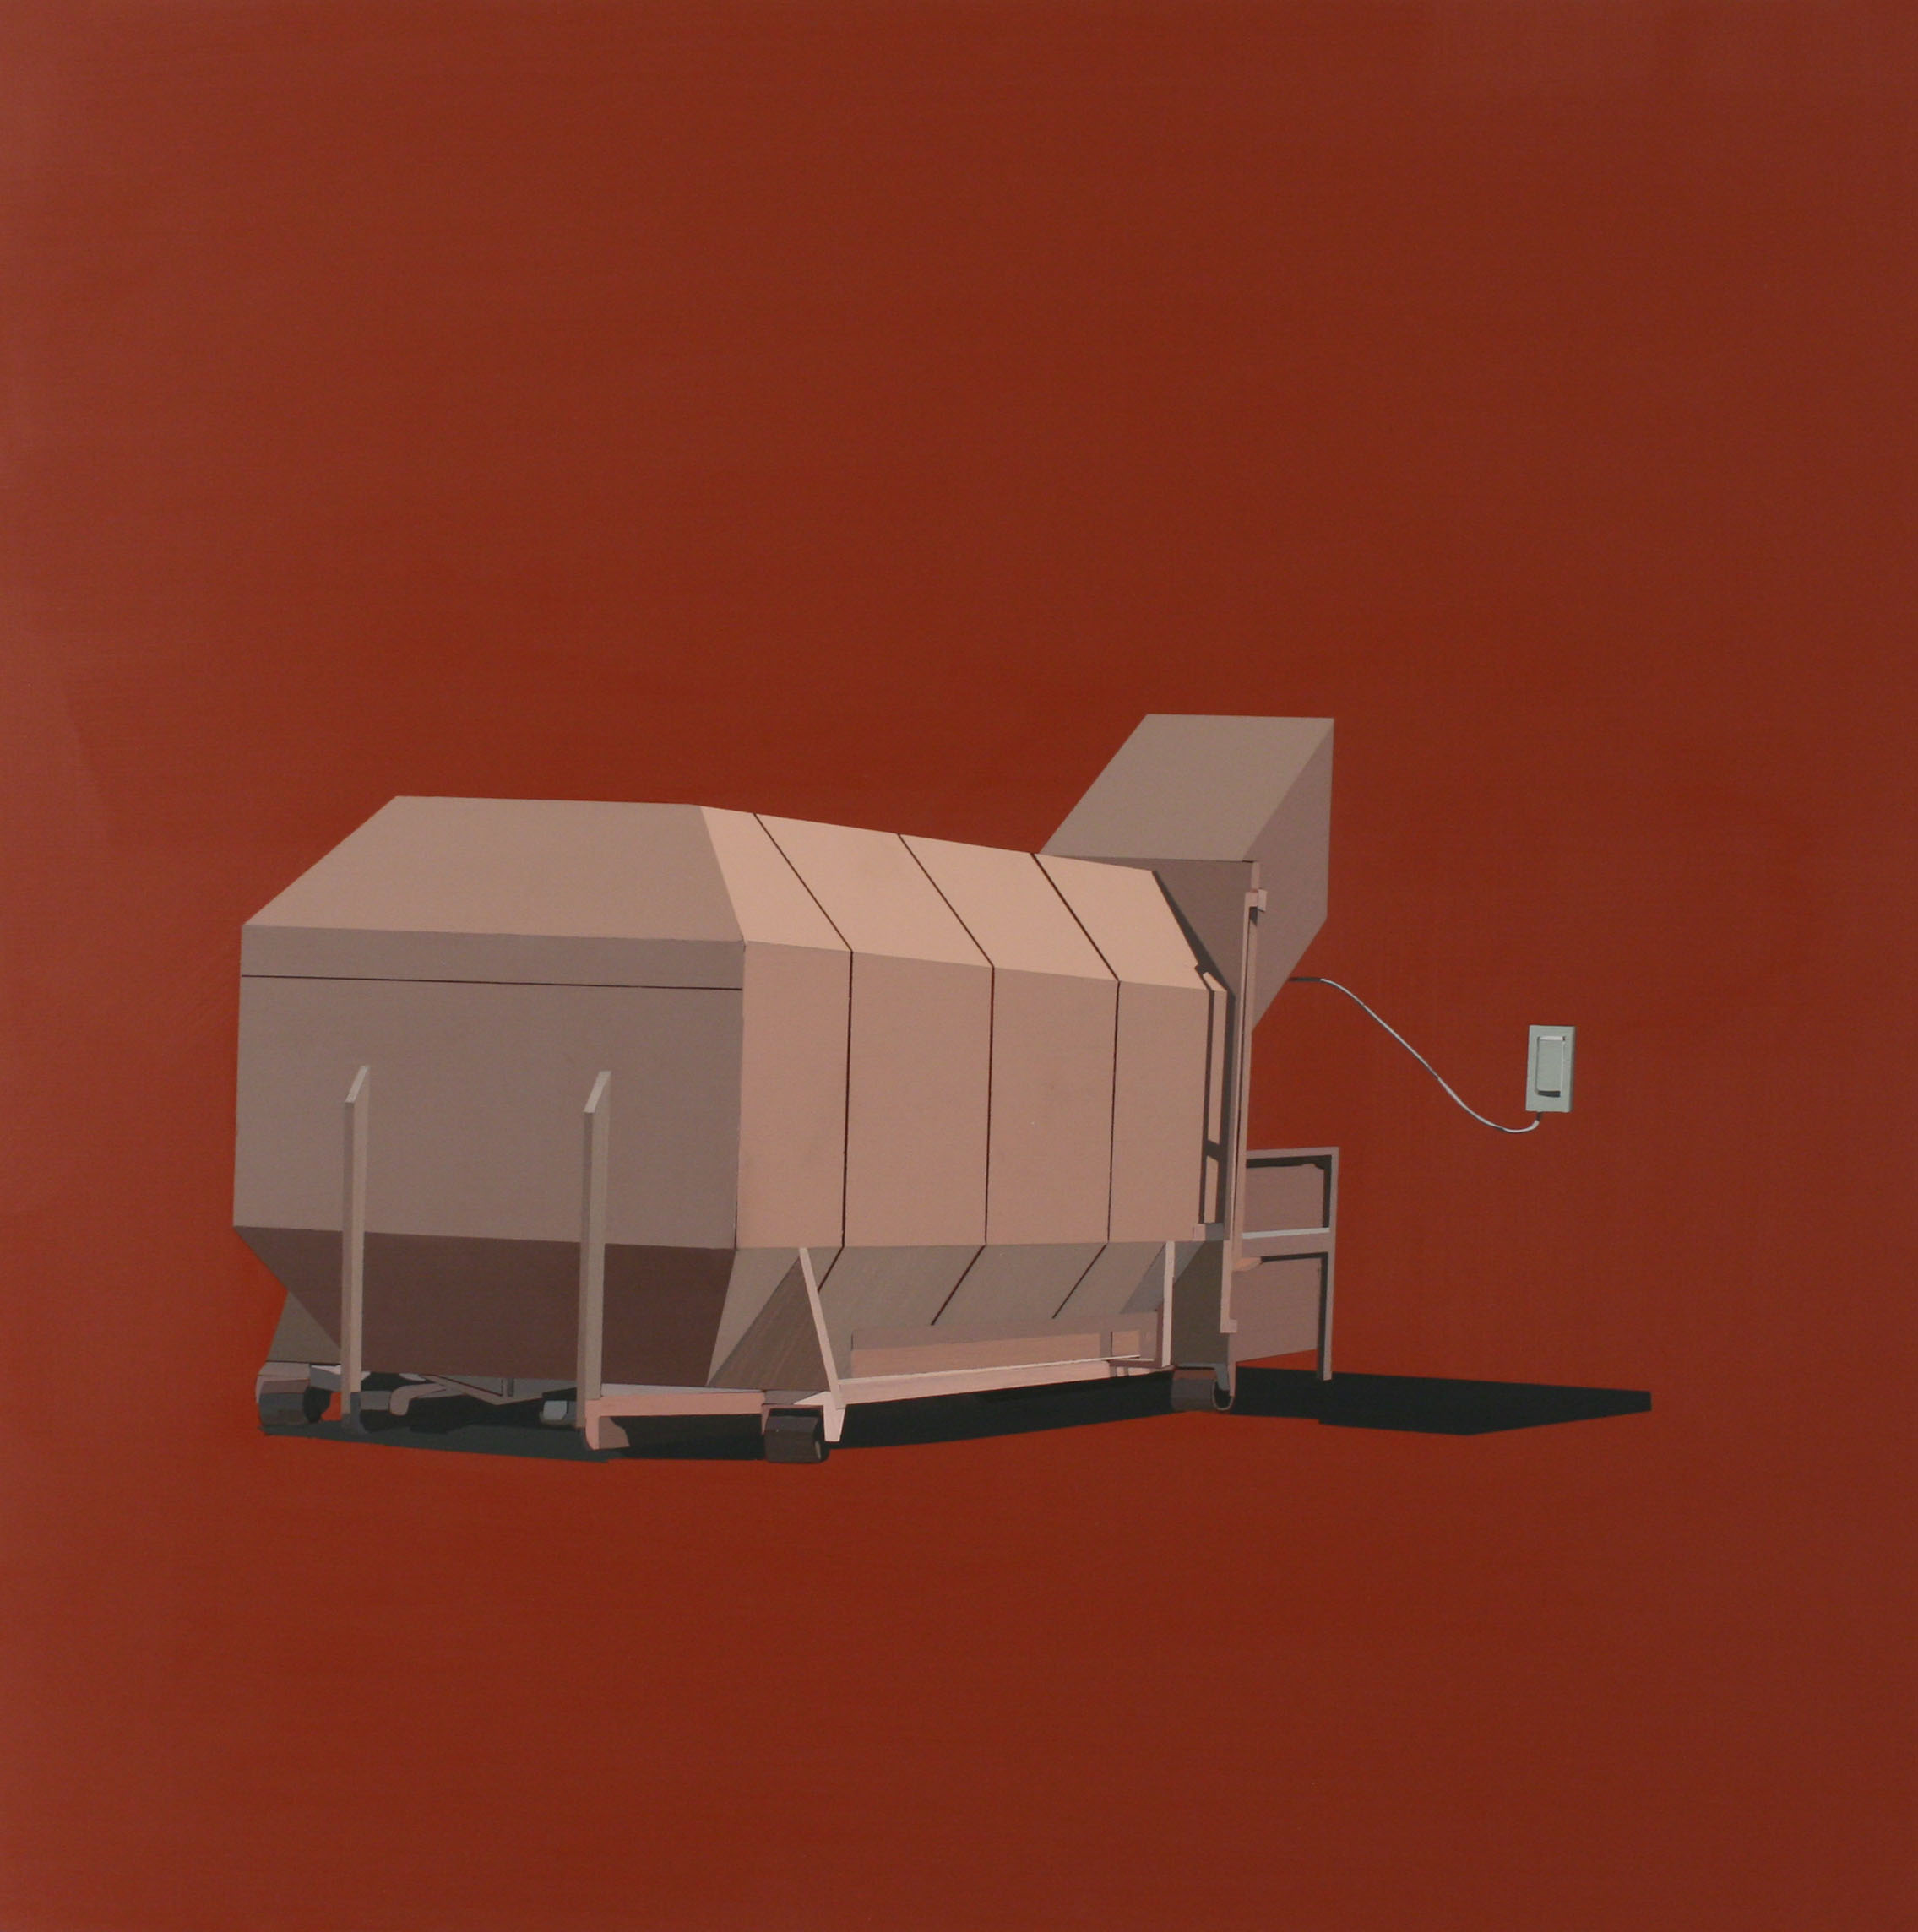   STRAWBERRY GREY DUMPSTER IN RETRO RED   oil on panel | 24" x 24" &nbsp;2010 